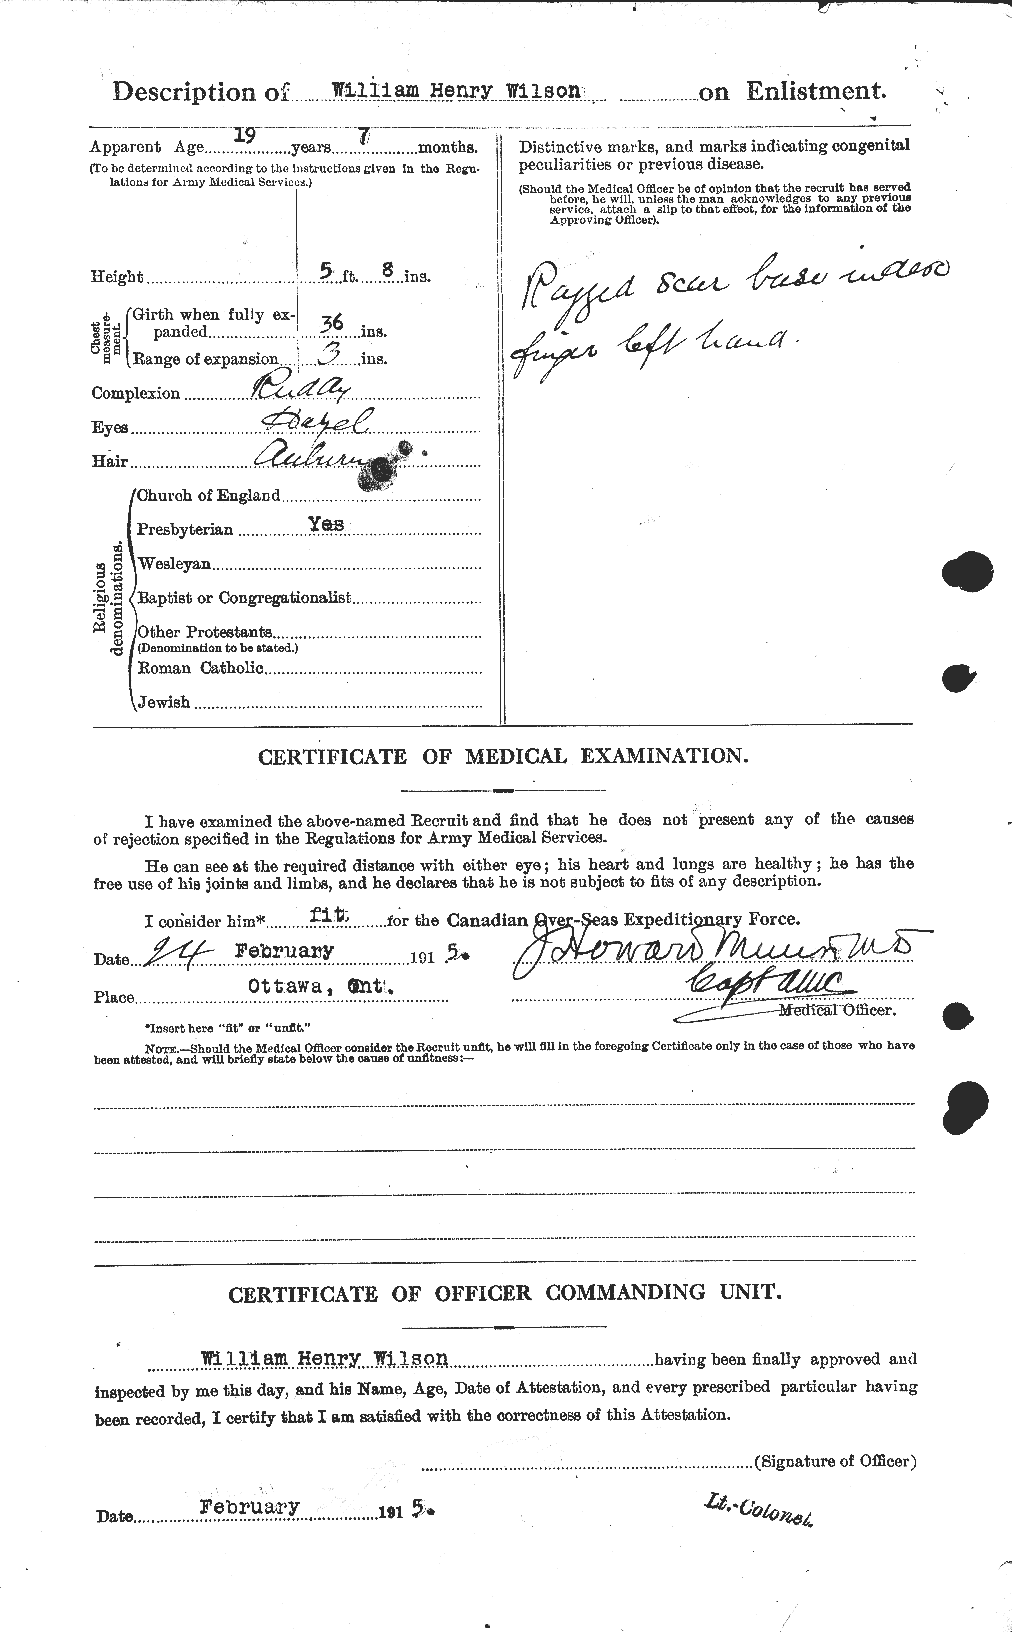 Personnel Records of the First World War - CEF 682024b